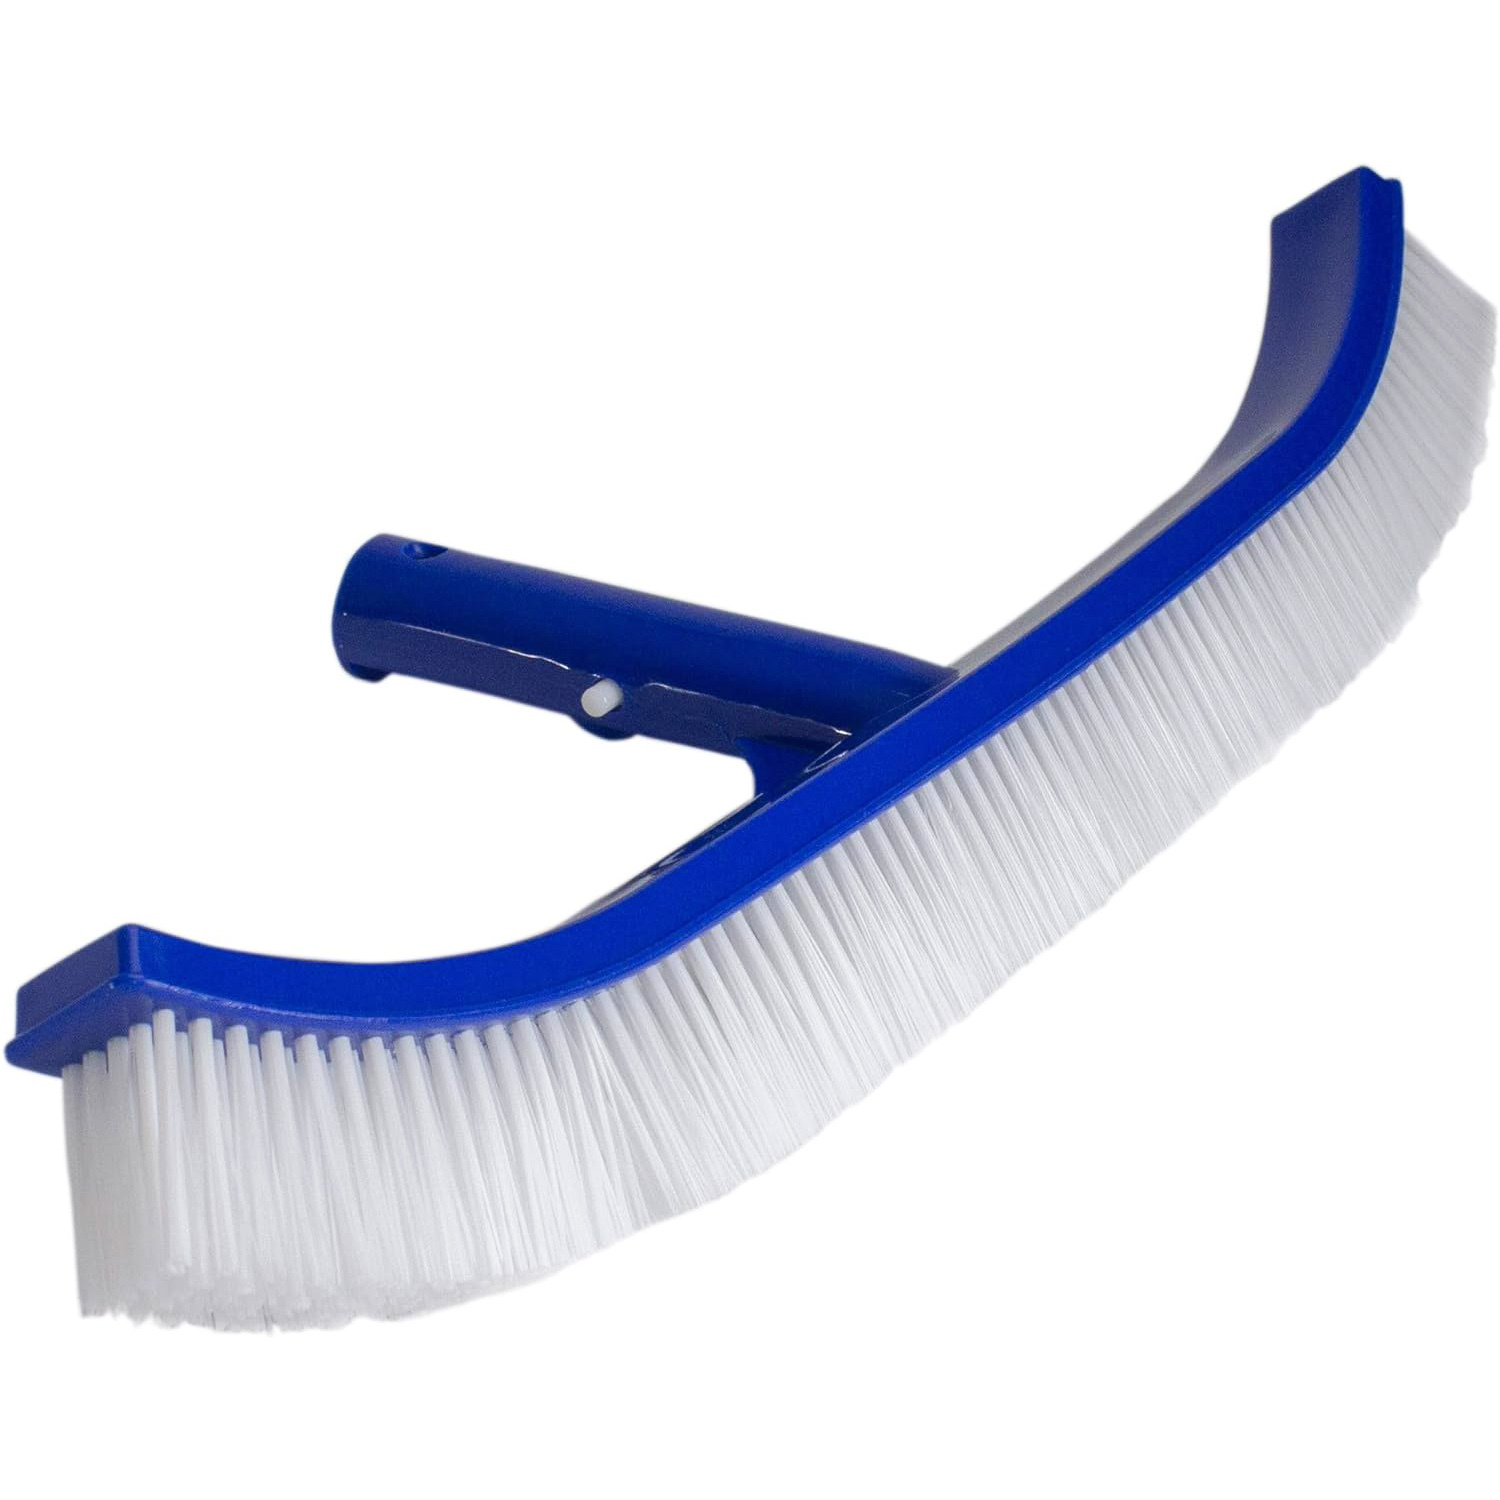 45cm Curved Pool Brush with Nylon Bristles for Cleaning Swimming Pool Walls